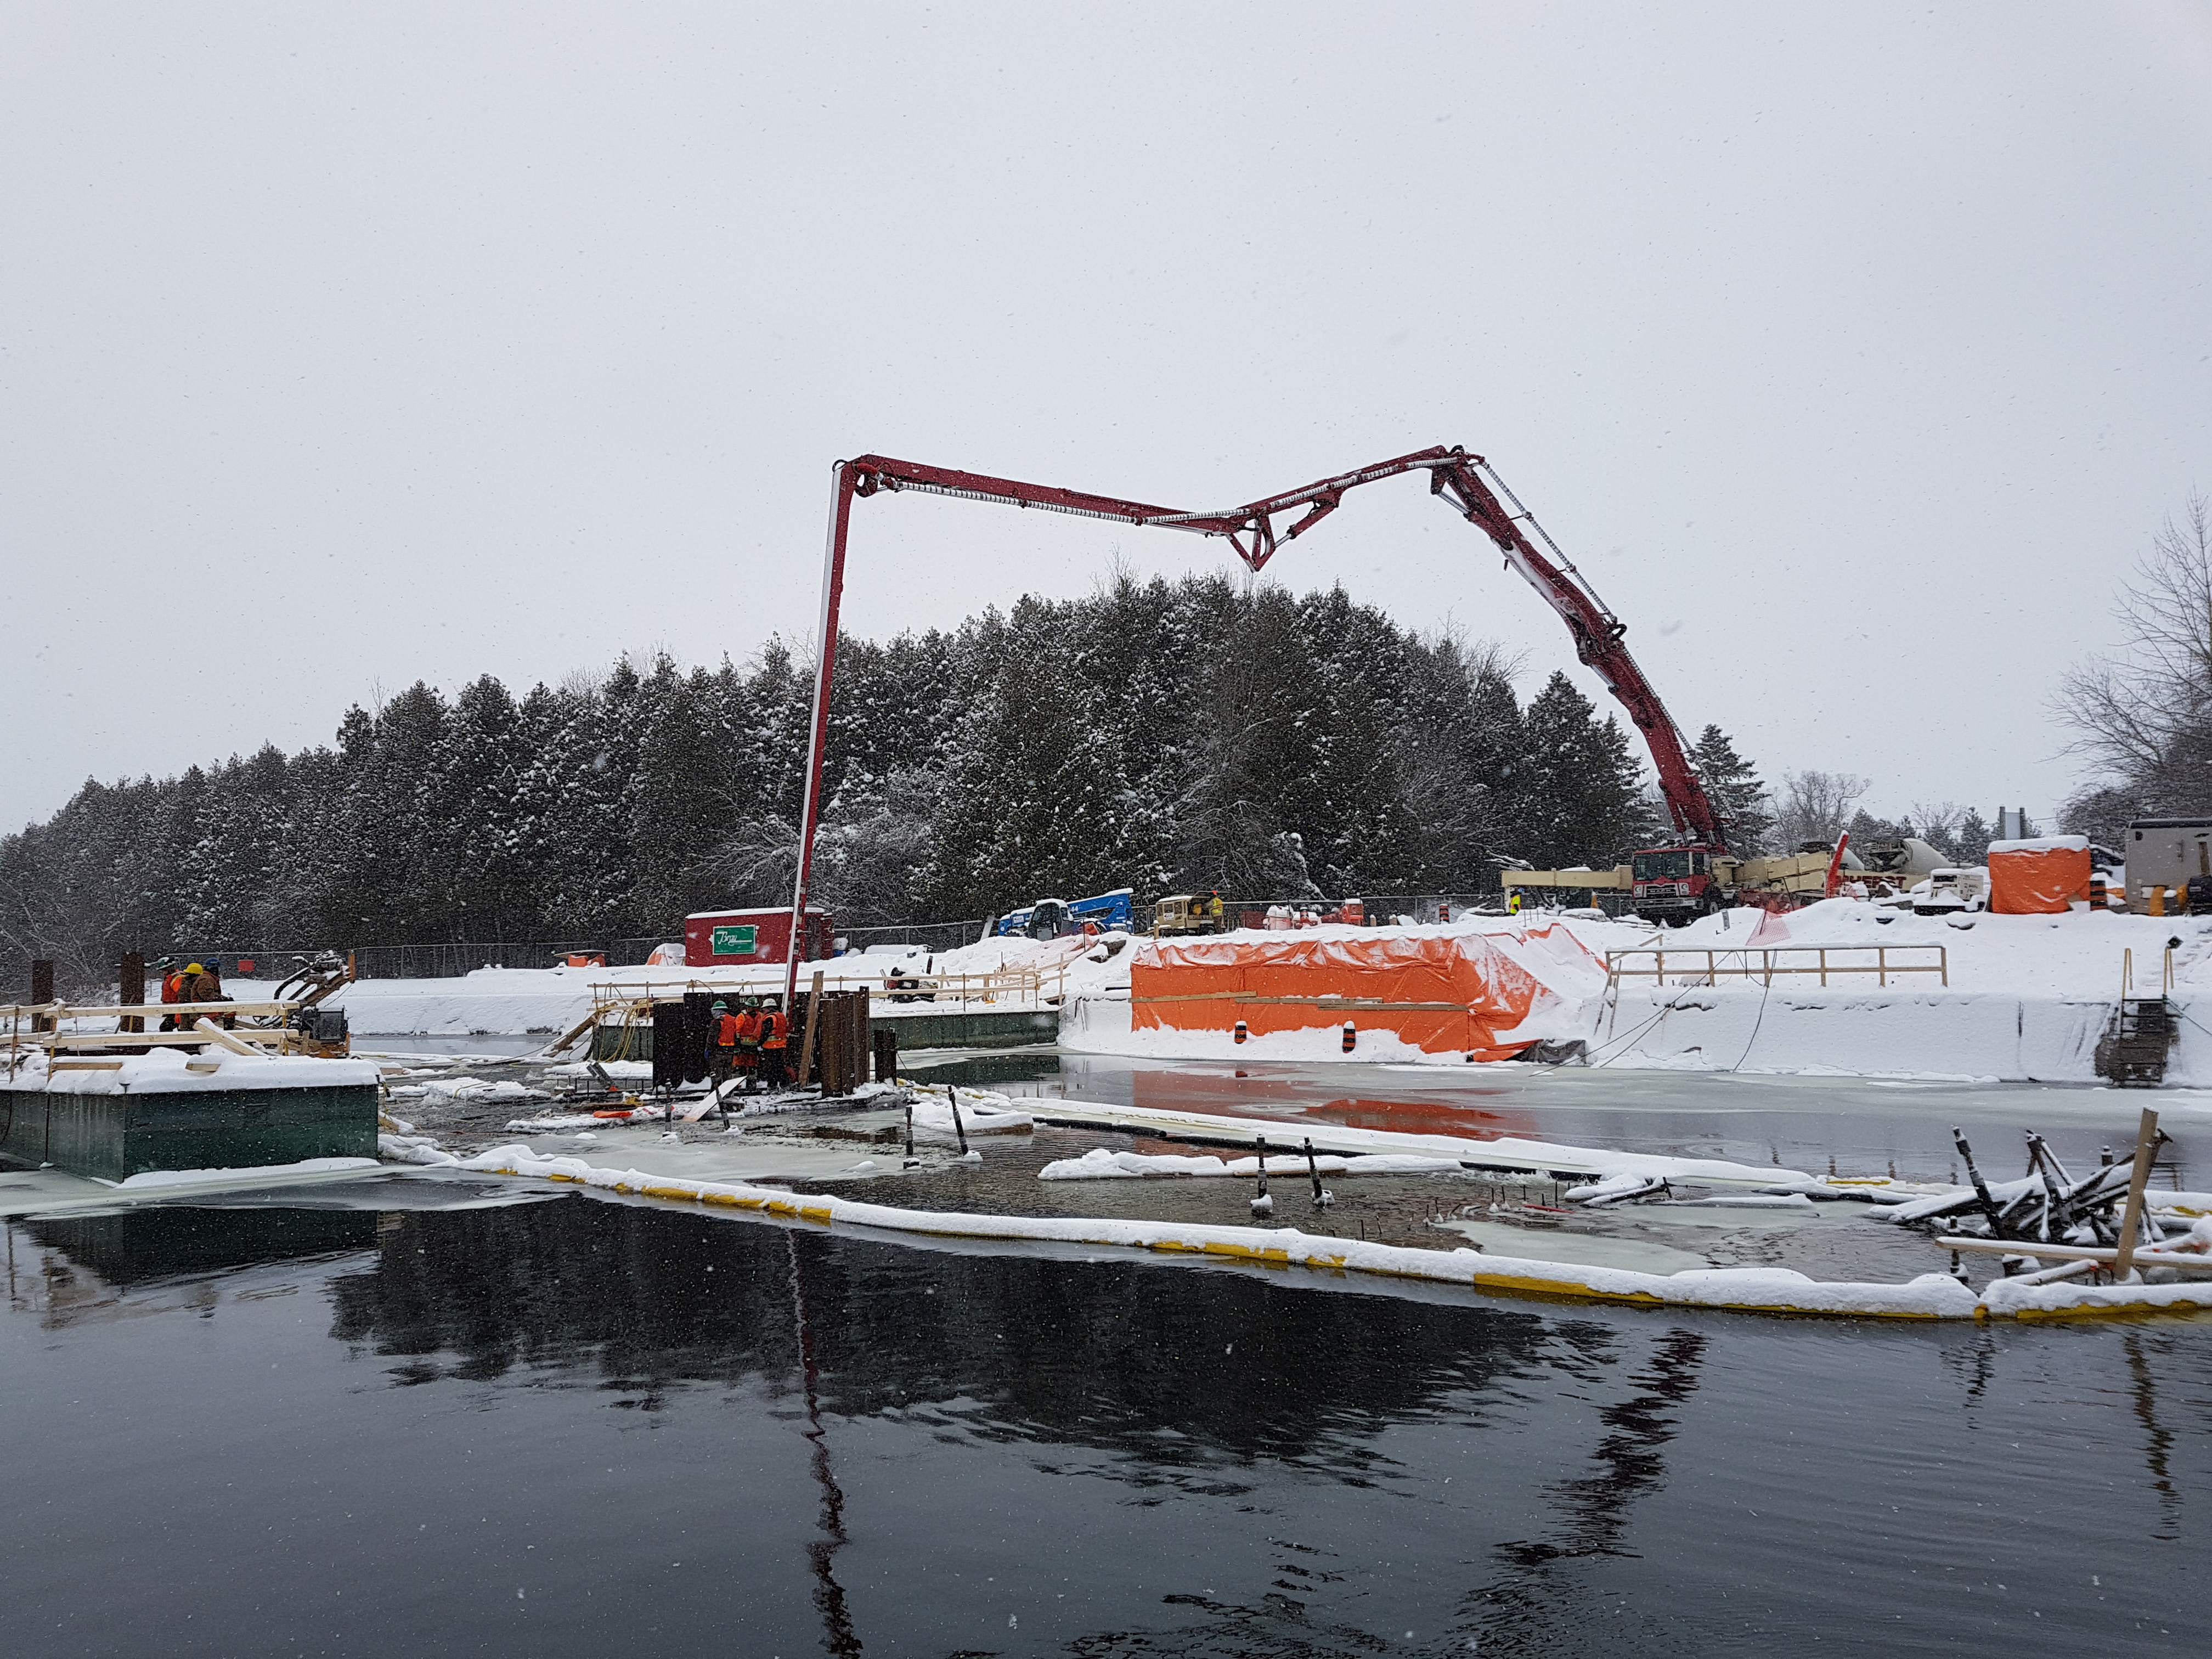 A snowy construction site. The extendable arm of a concrete pump truck reaches out over the water.